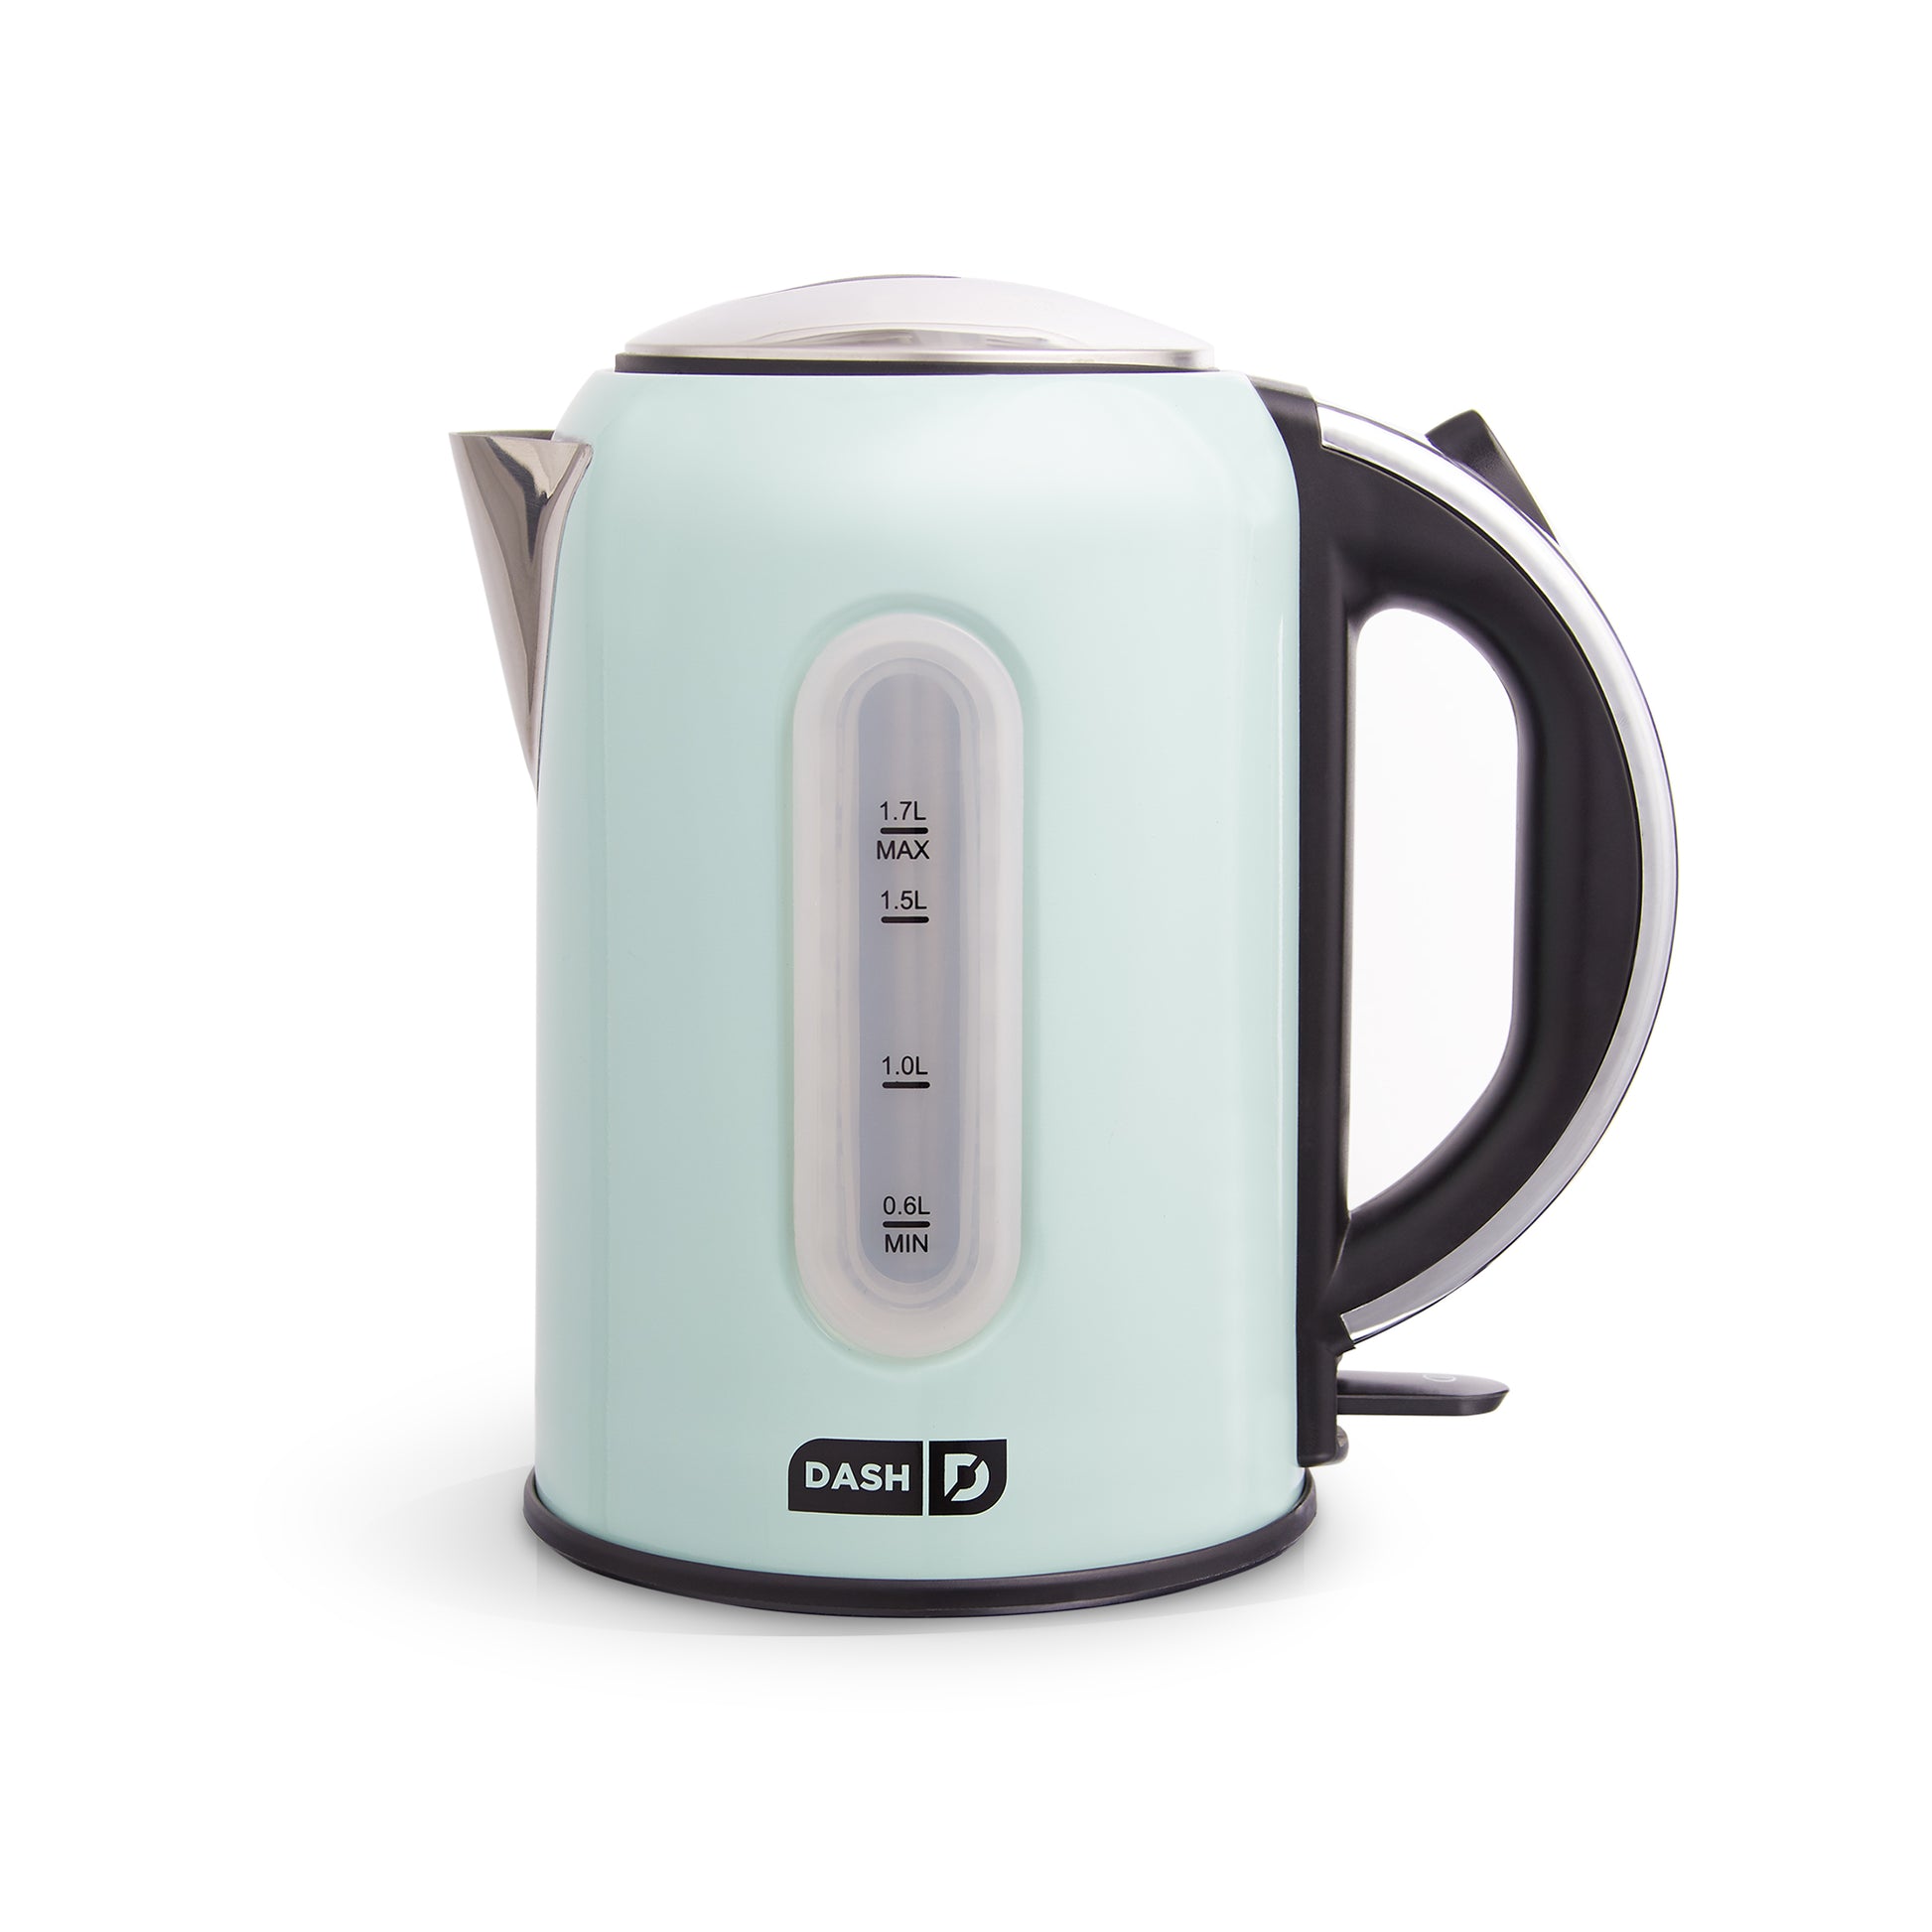 Dash DEK001RD Electric Kettle + Water Heater with Rapid Boil, Cool